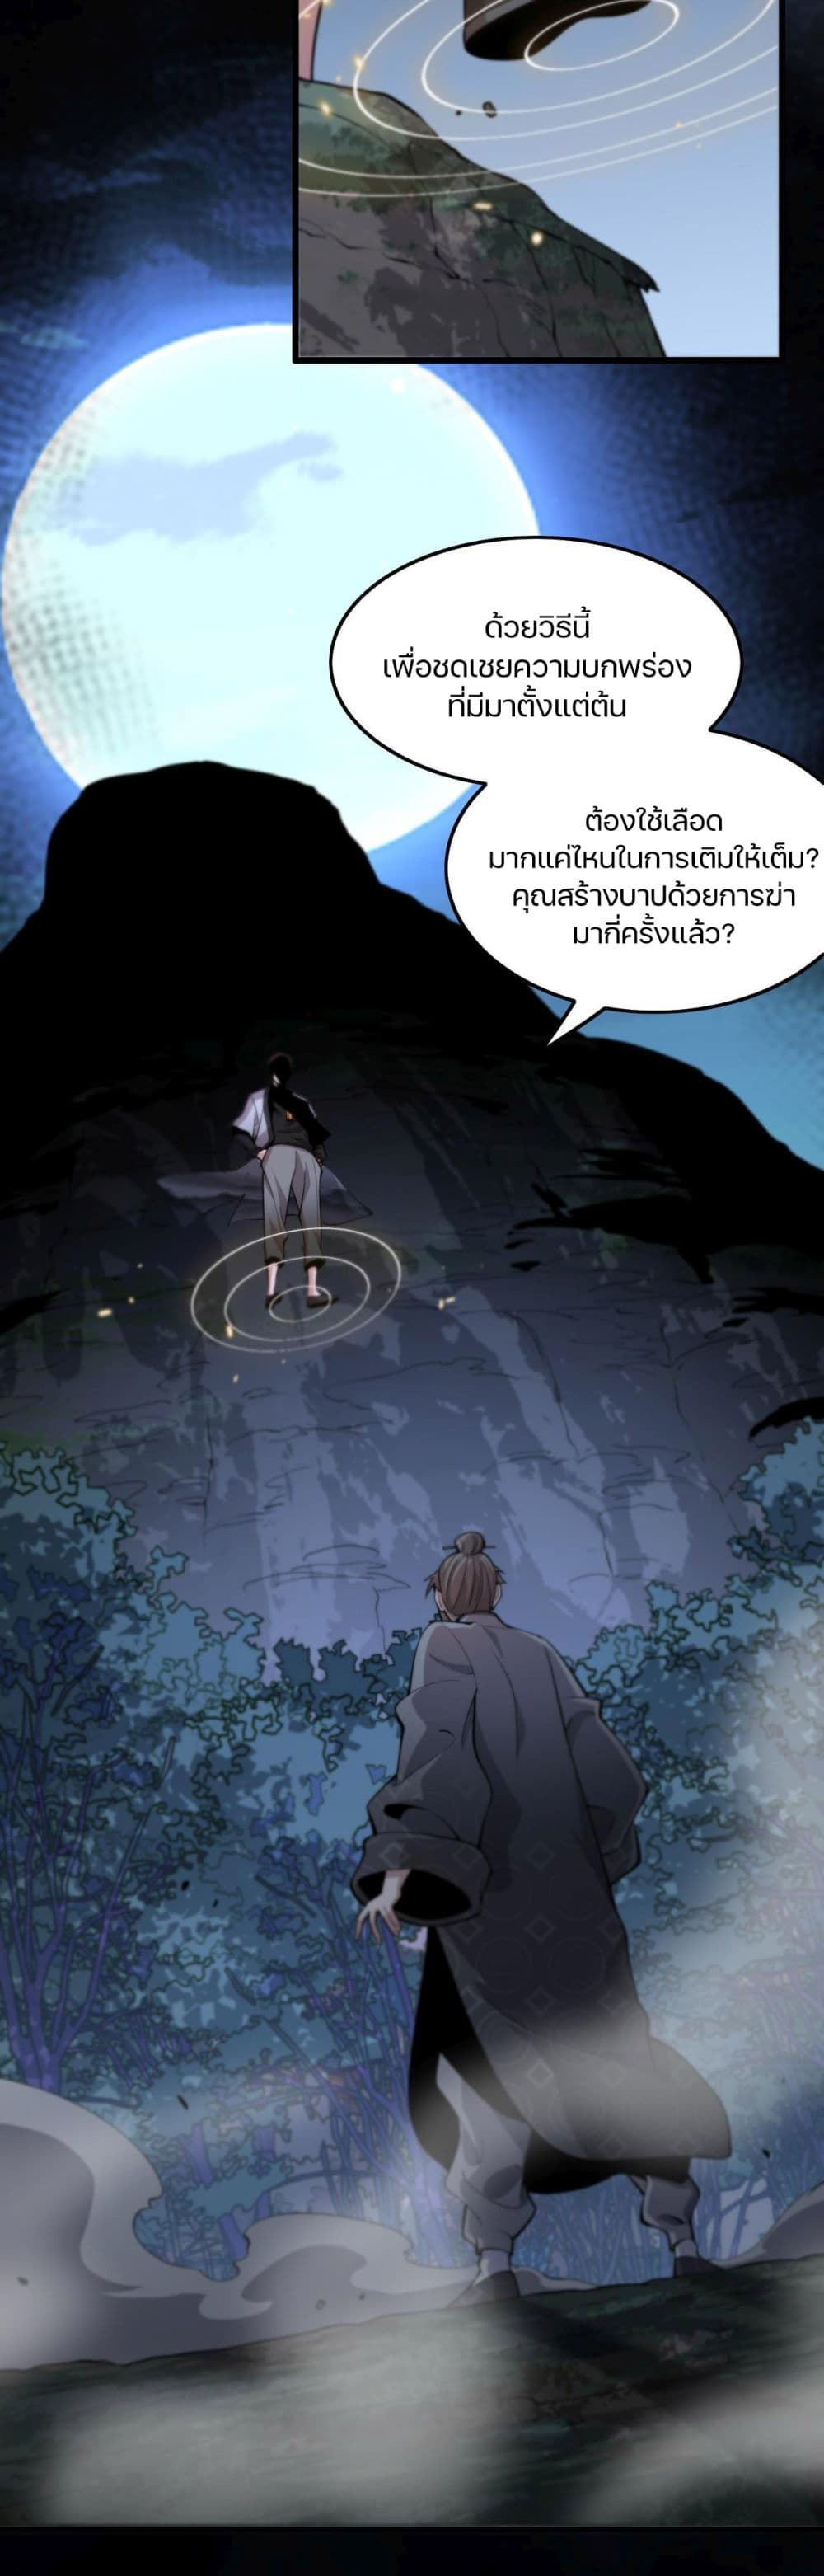 The Grand Master came down from the Mountain 42-จินเซียวค่ายแปดก๊ก